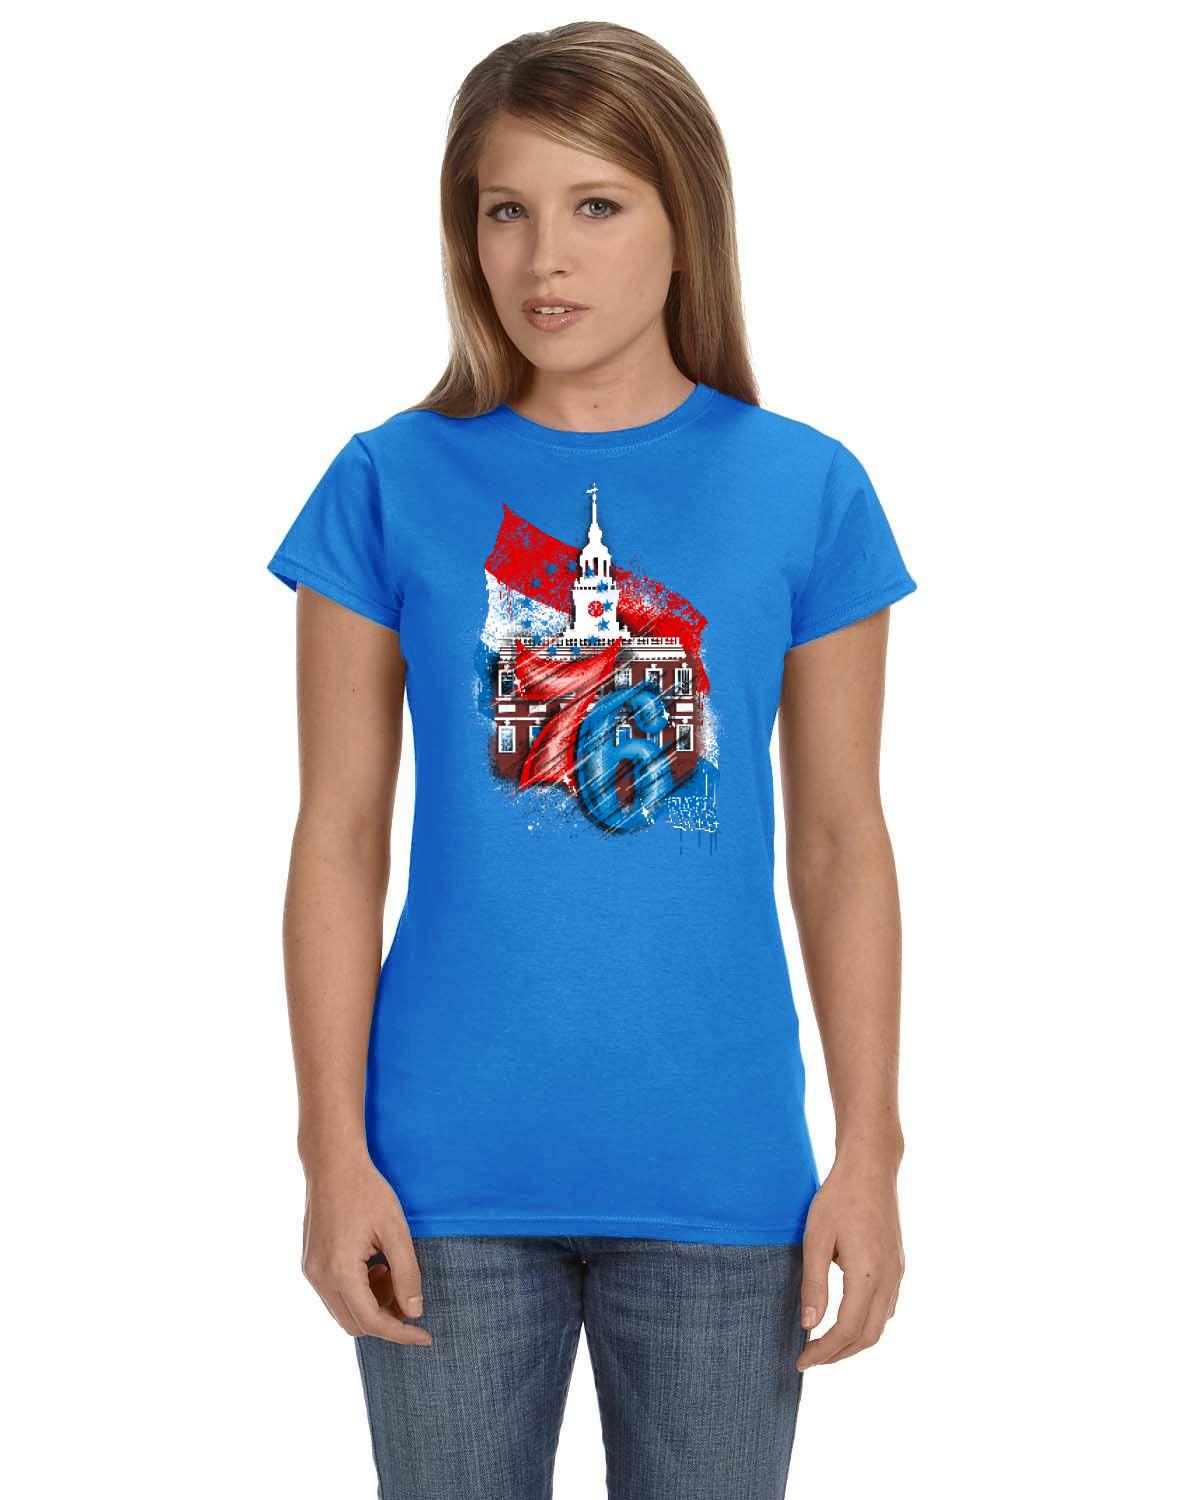 76ers Independence Ladies Tee (Gildan Ladies' Softstyle 7.5 oz./lin. yd. Fitted T-Shirt | G640L)